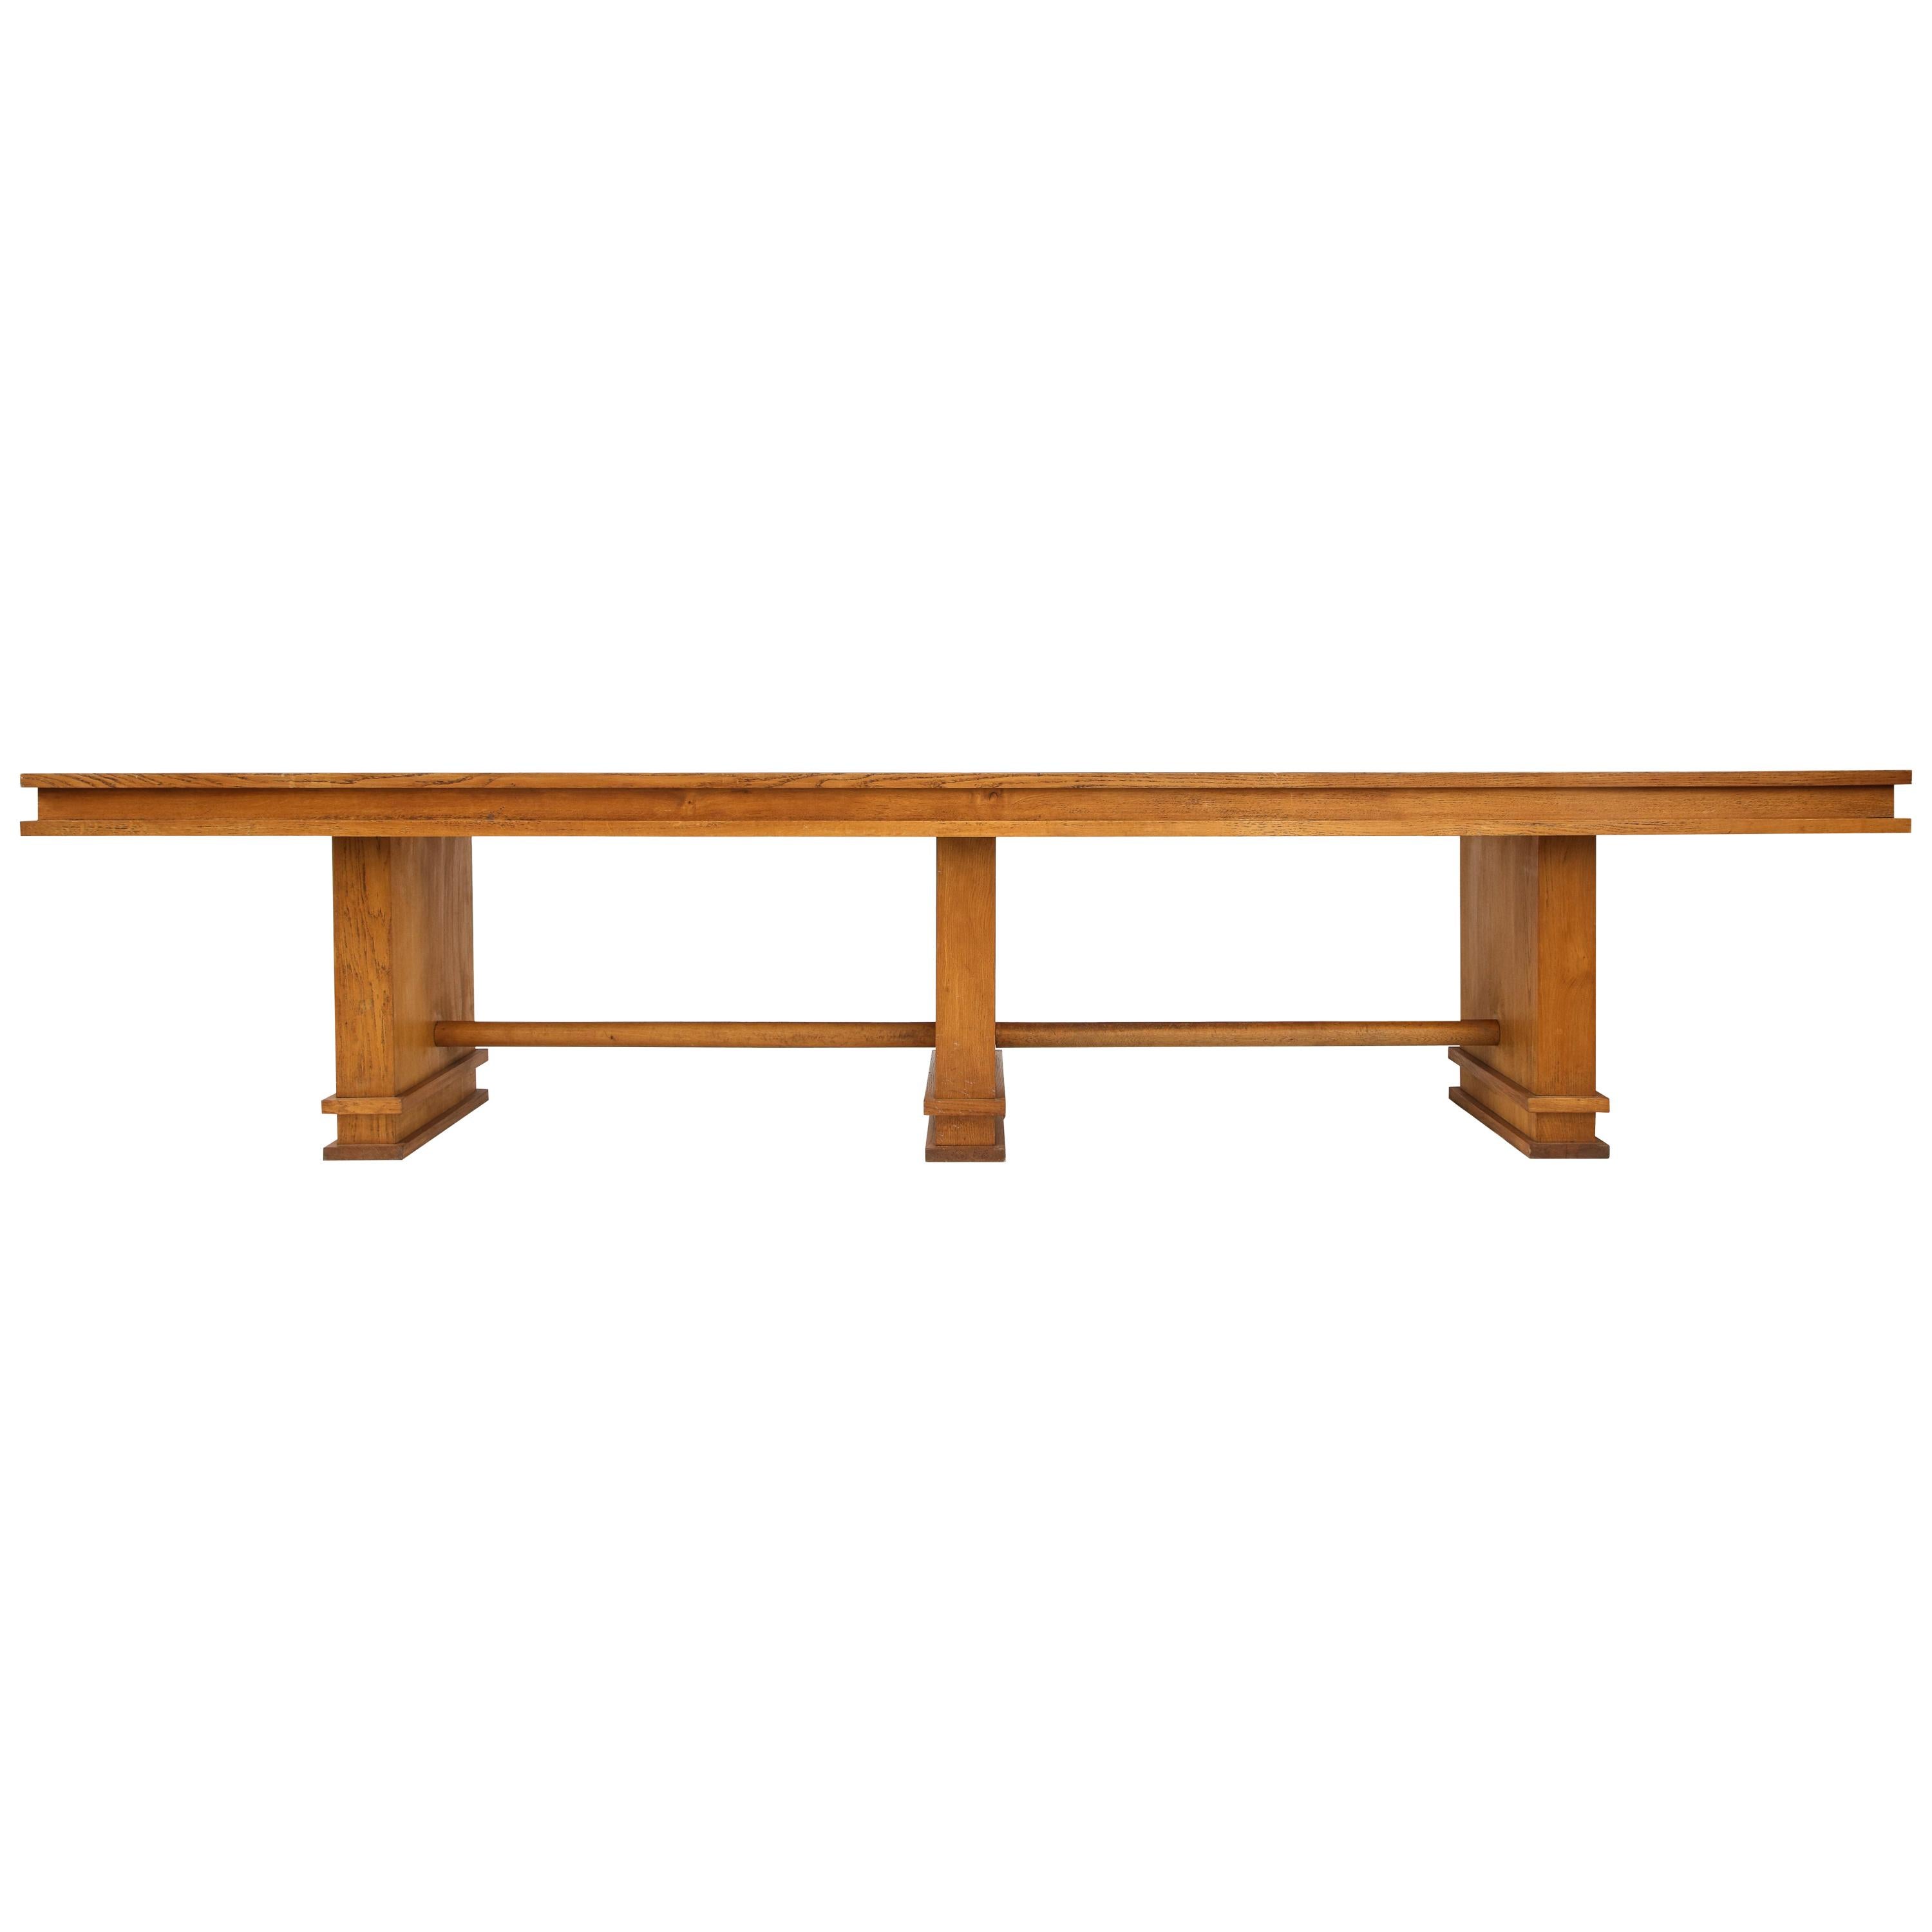 This monumental piece is broad and muscular. Defined by simple stately geometry. It will serve well as a large console, entry table, library table or shallow dining table. 

It is possible to replace the green laminate panels with leather, parchment